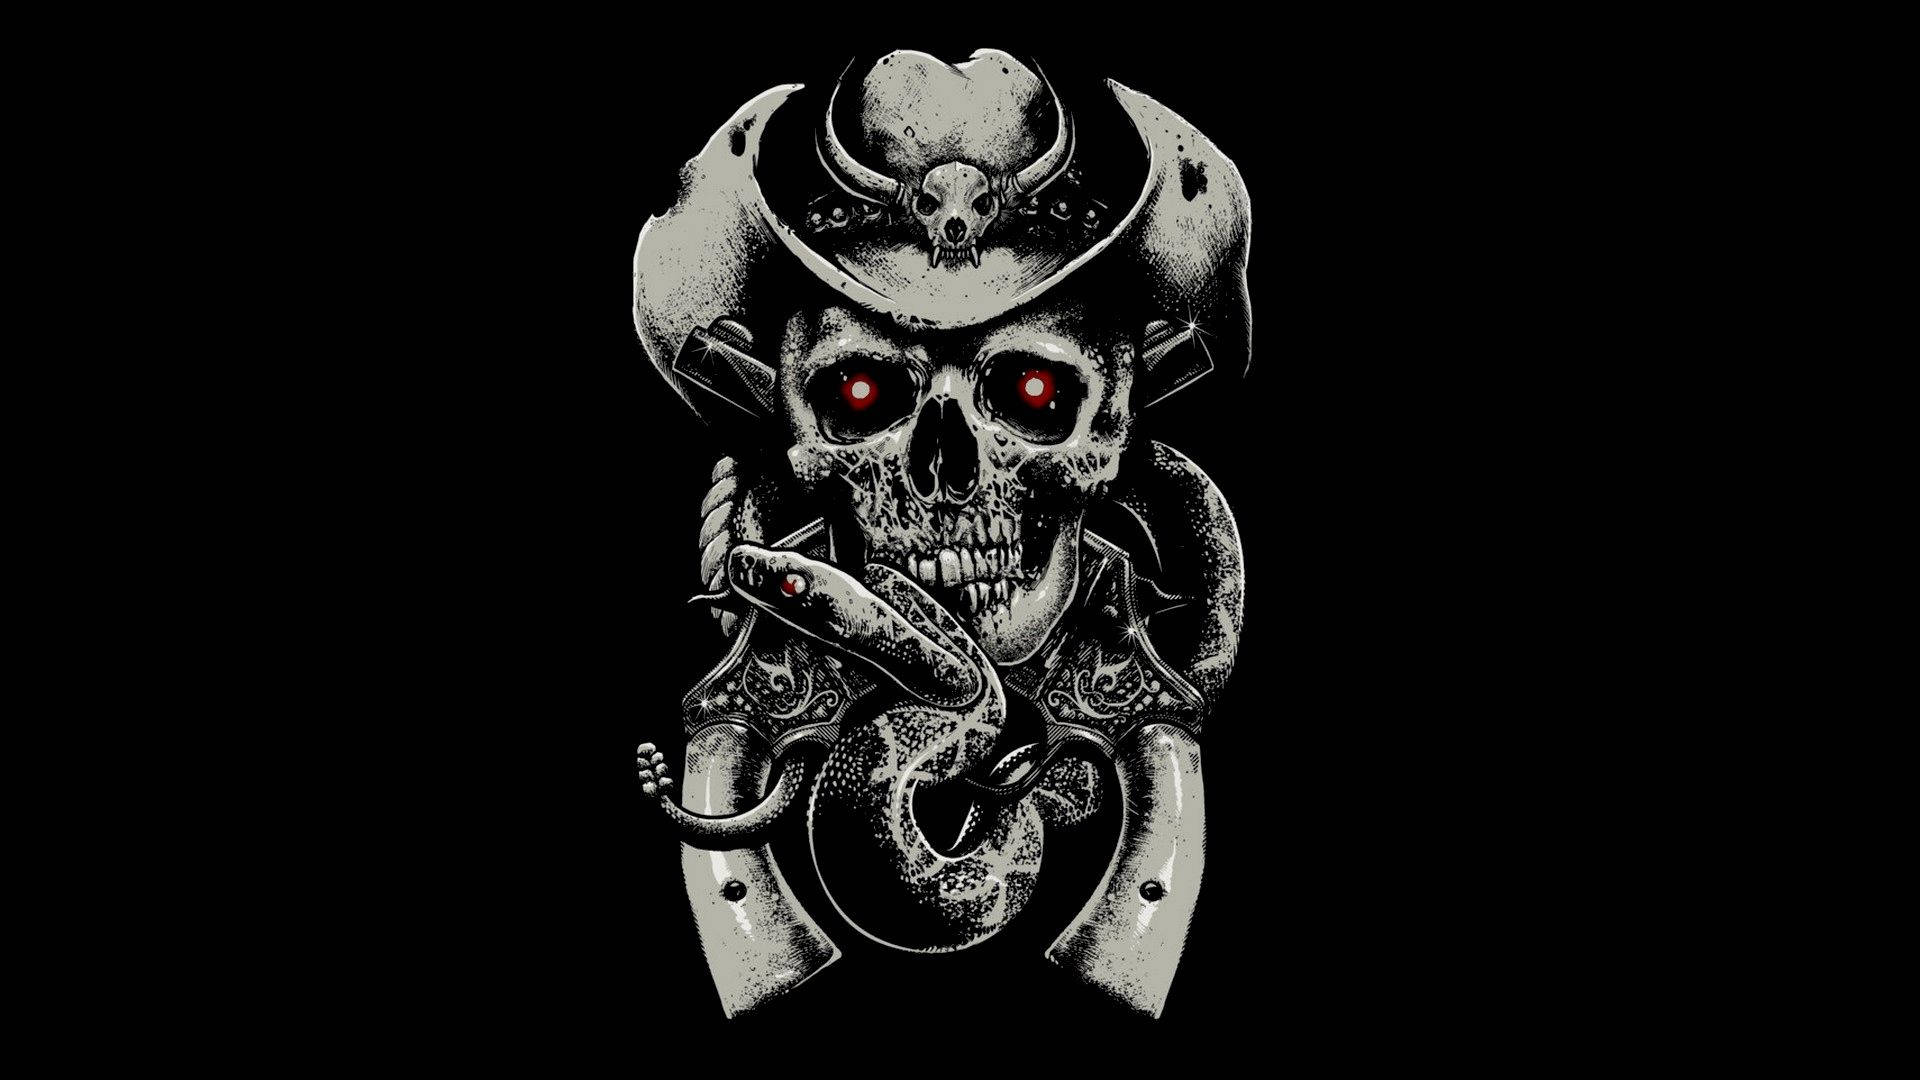 A Skull With A Knife And A Red Eye Wallpaper